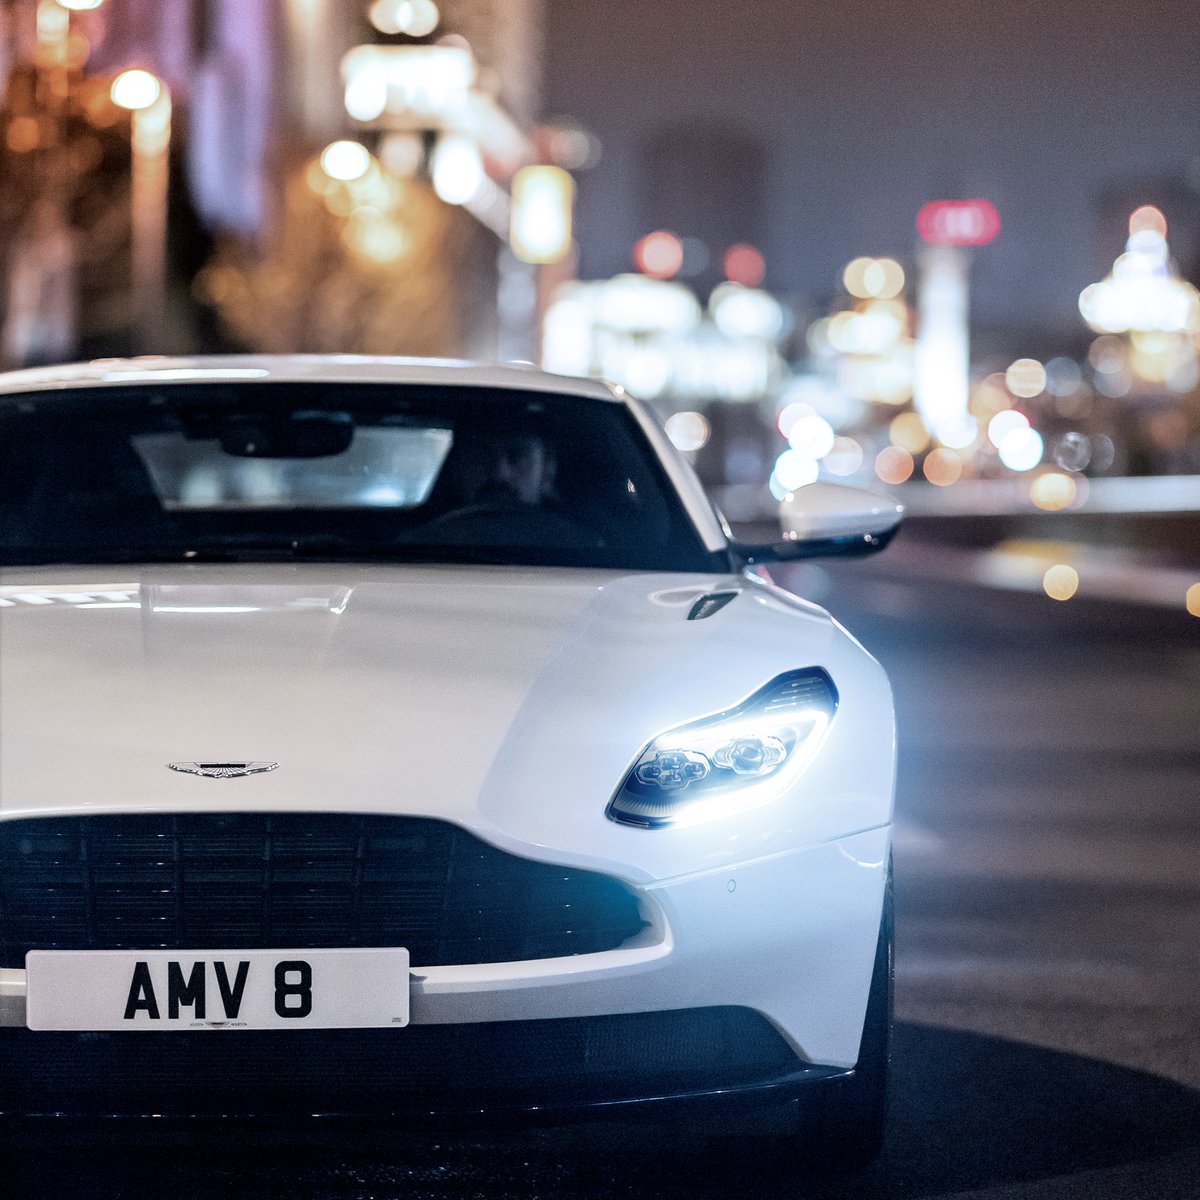 Striking the perfect balance between excitement and refinement - DB11 is automotive art.

Unmistakably Aston Martin.

#DB11 #AstonMartin #BEAUTIFULISANUMBER